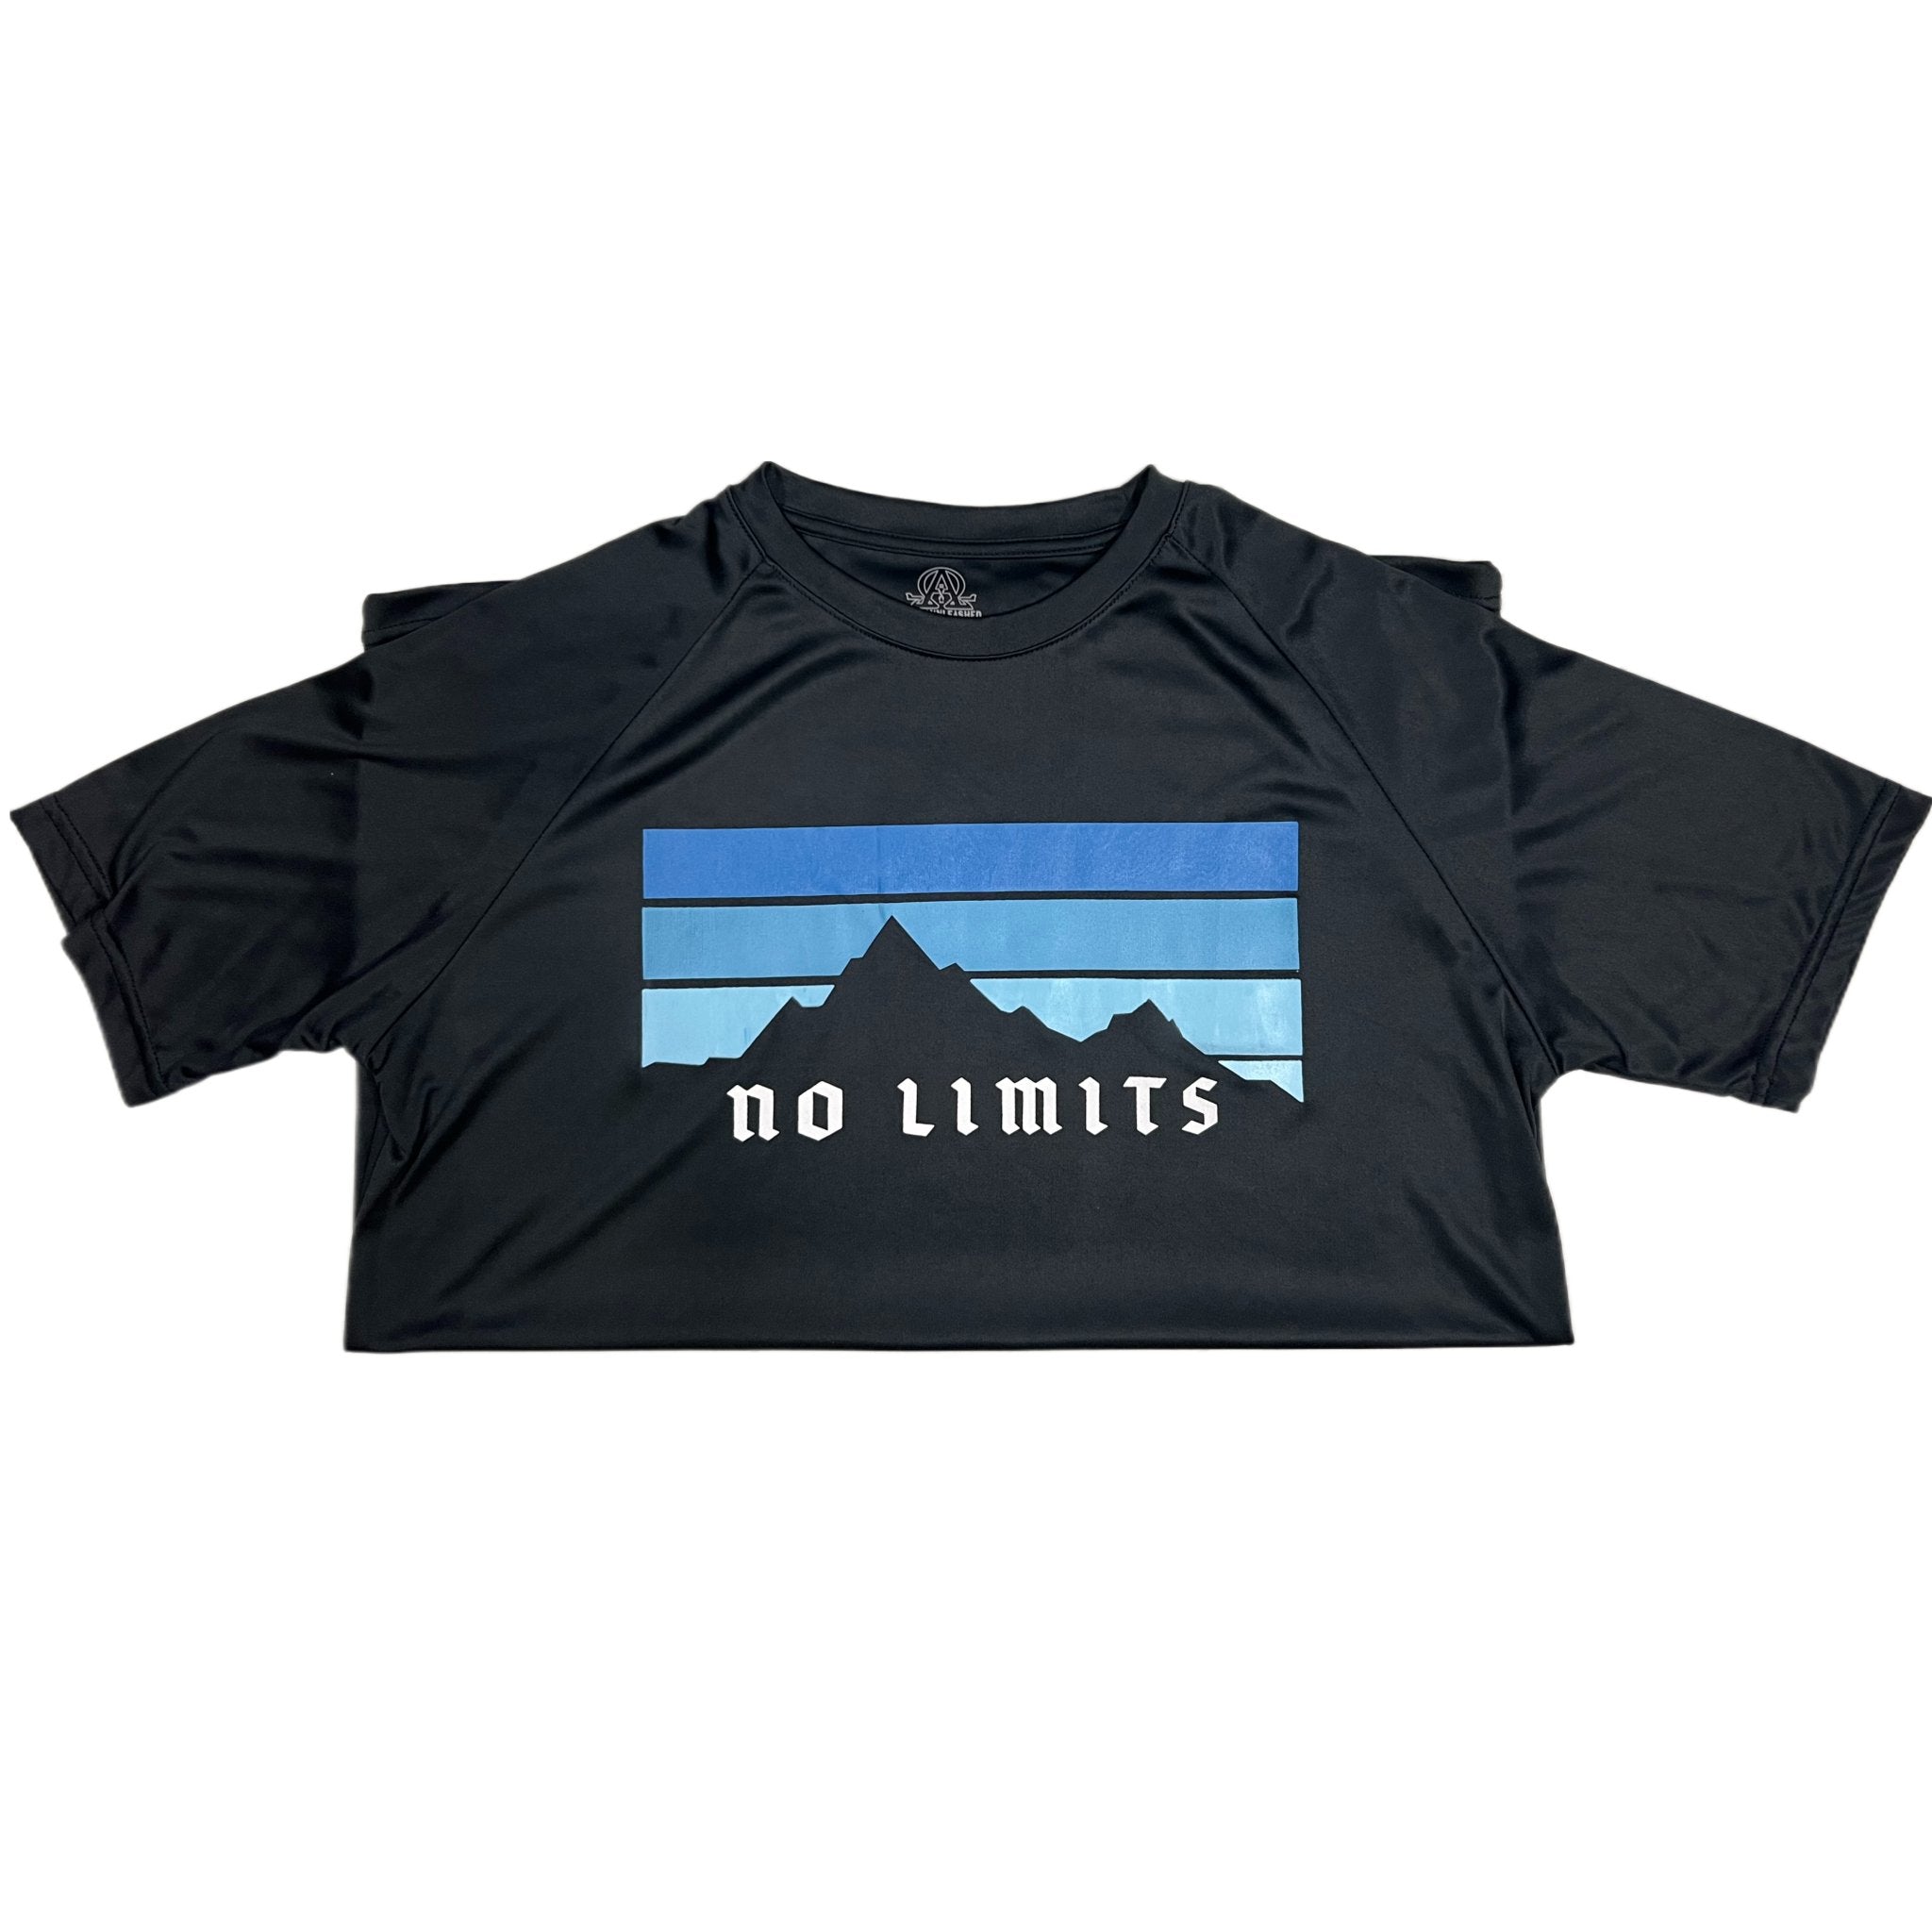 DRY-FIT 'NO LIMITS' Black Mountain T-Shirt - Outdoor Adventure and Hiking Performance Tee - ALPHAunleashed